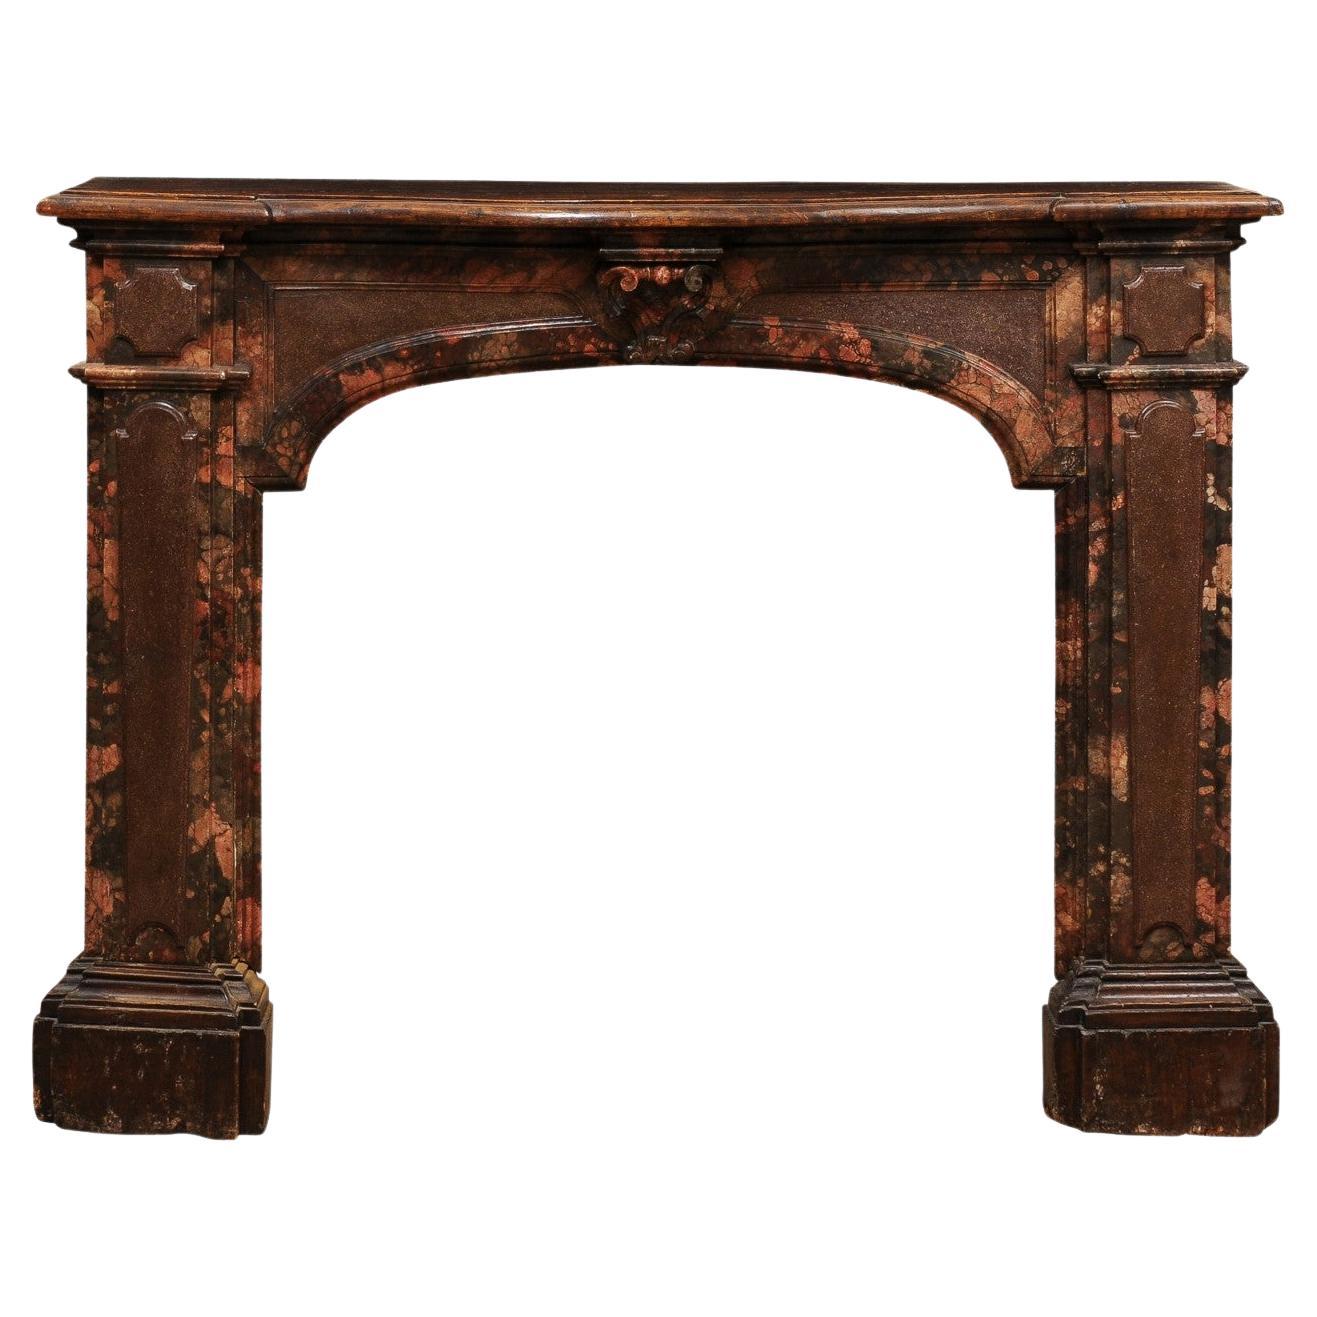 18th Century Italian Walnut & Faux Marble Painted Fireplace Surround / Mantle For Sale